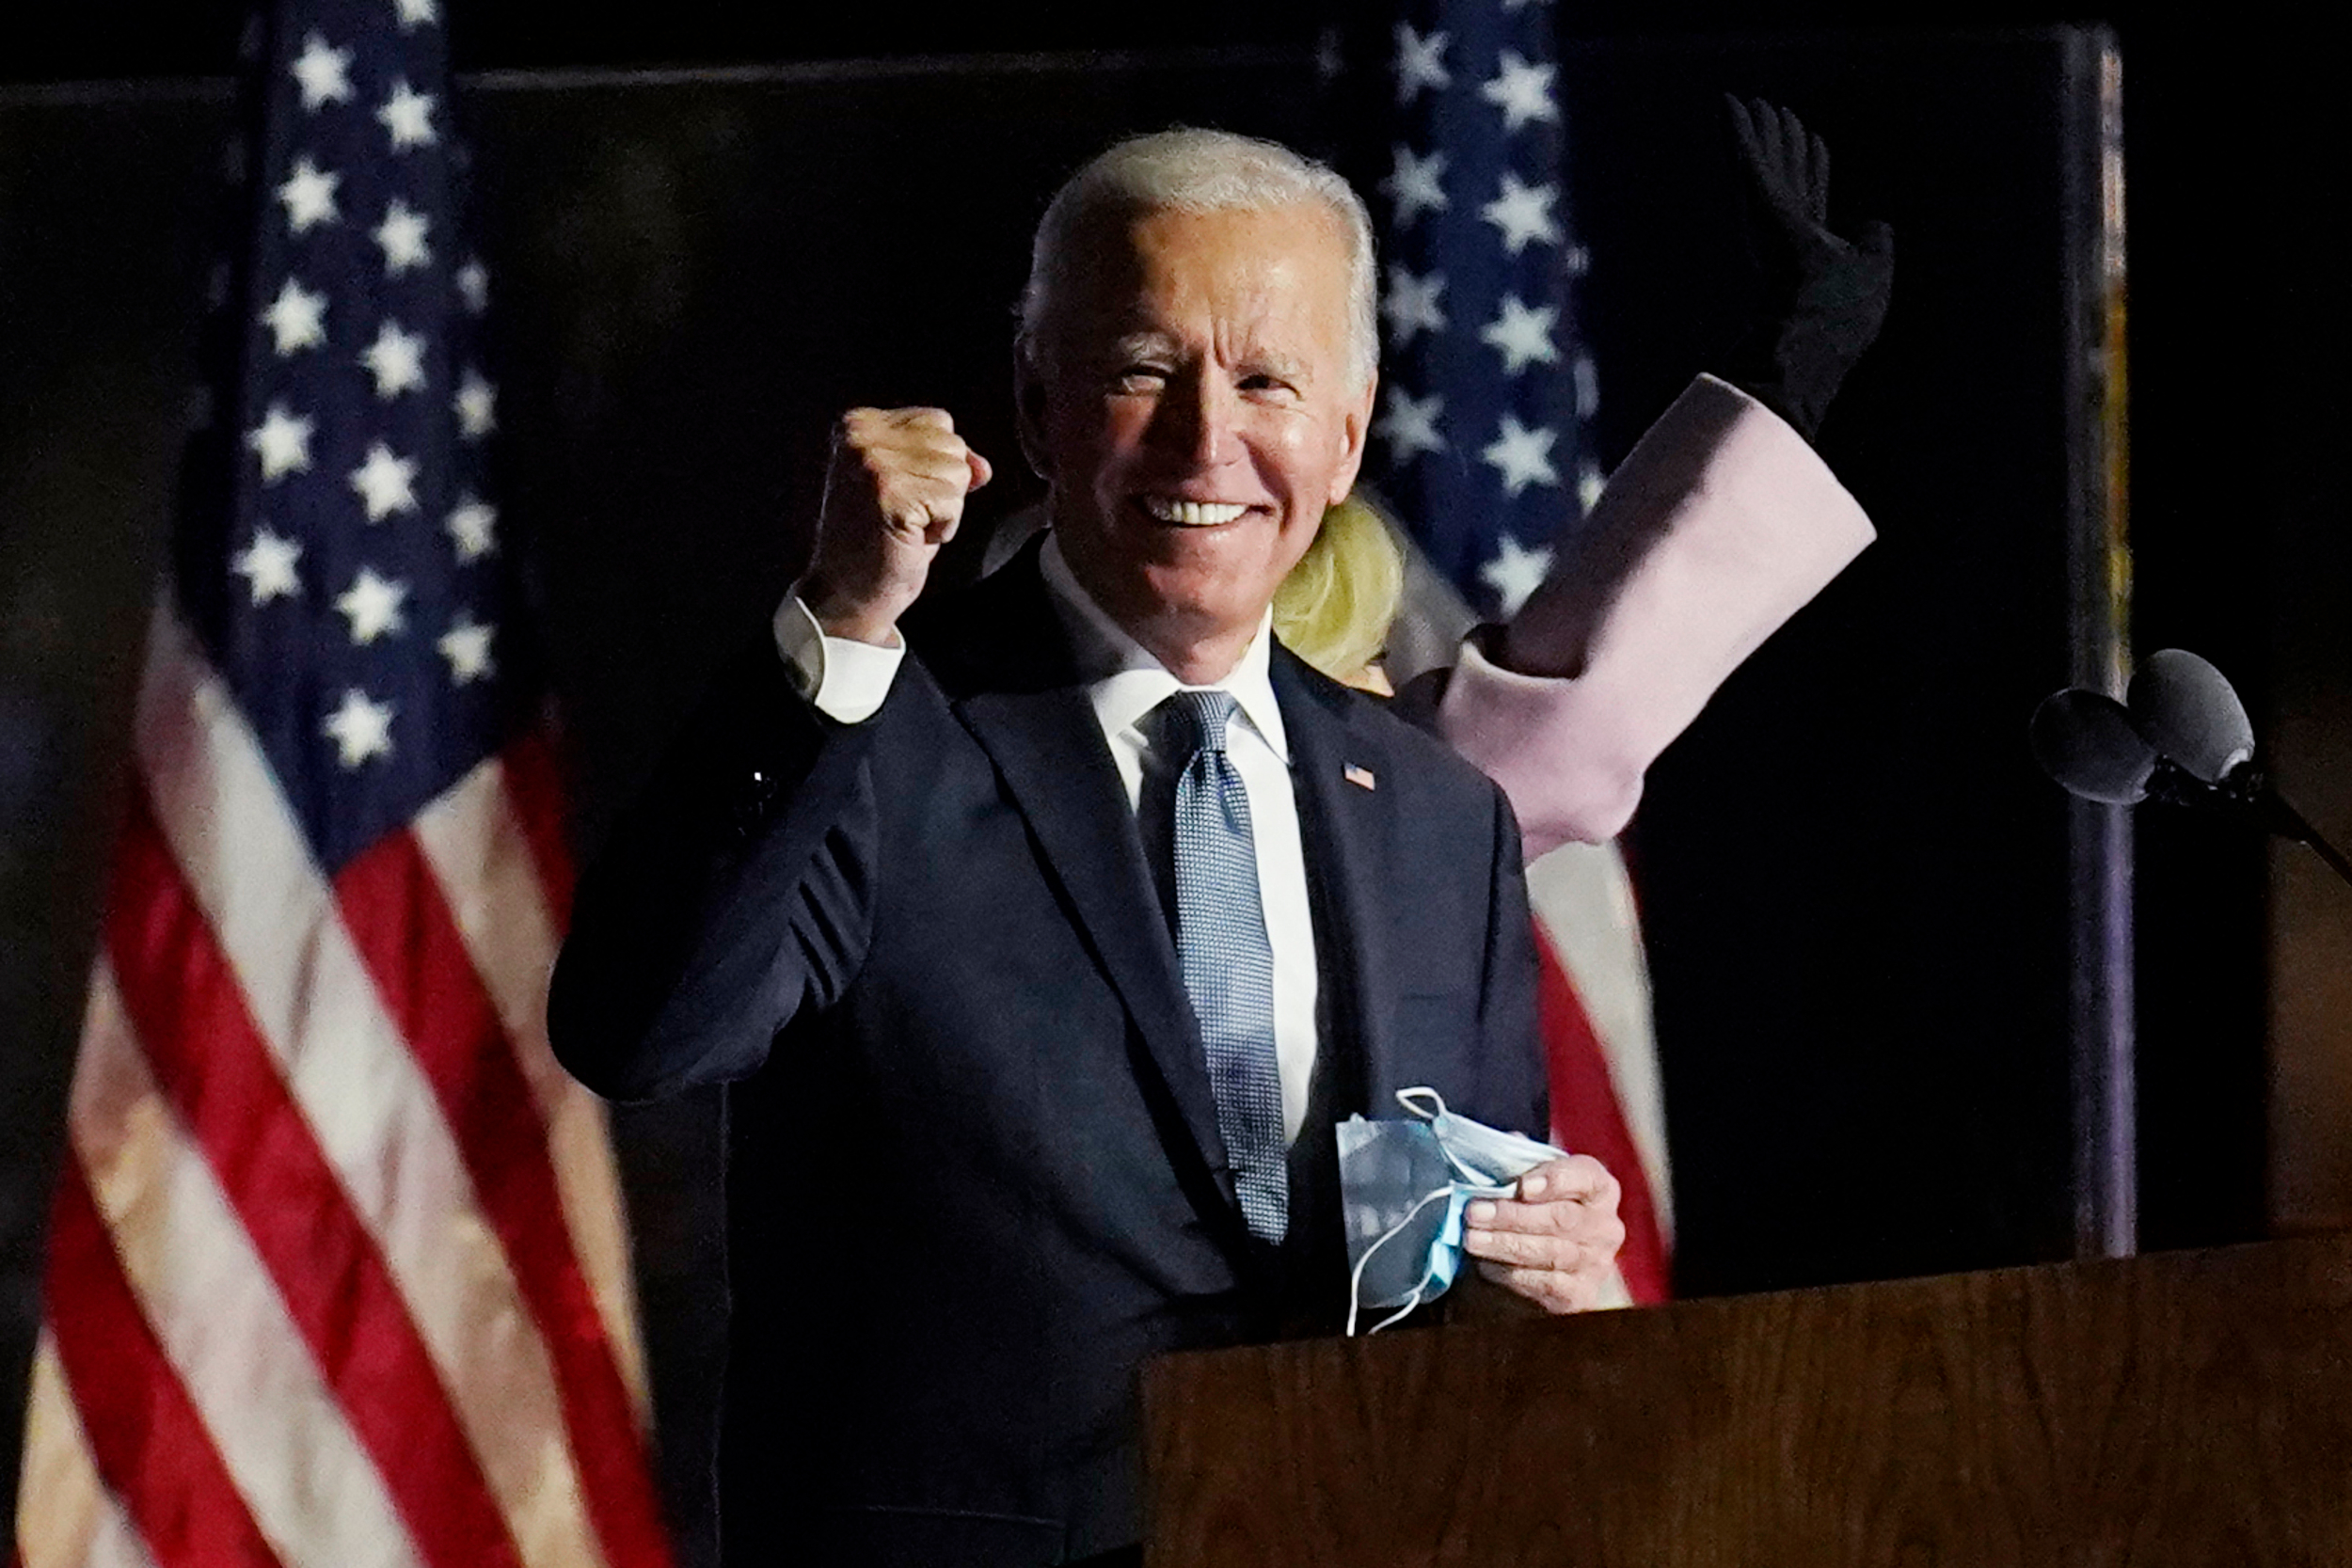 11/07/2020,USA:Democratic presidential candidate former Vice President Joe Biden speaks to supporters,in Wilmington.